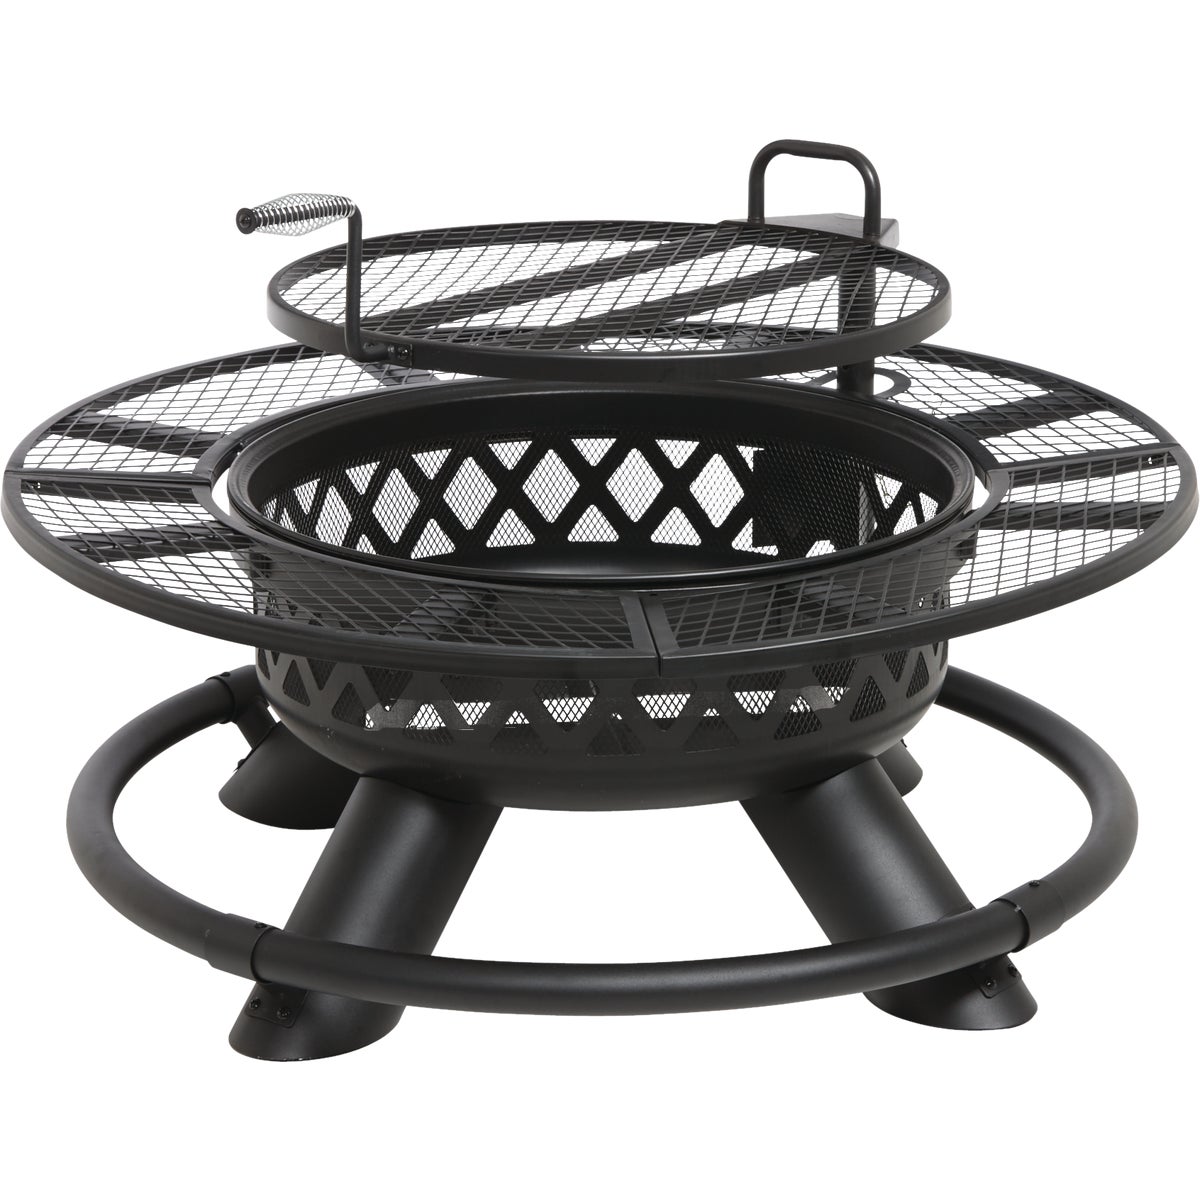 Item 800477, Camp fire pit has a heavy duty metal cooking grate for grilling.